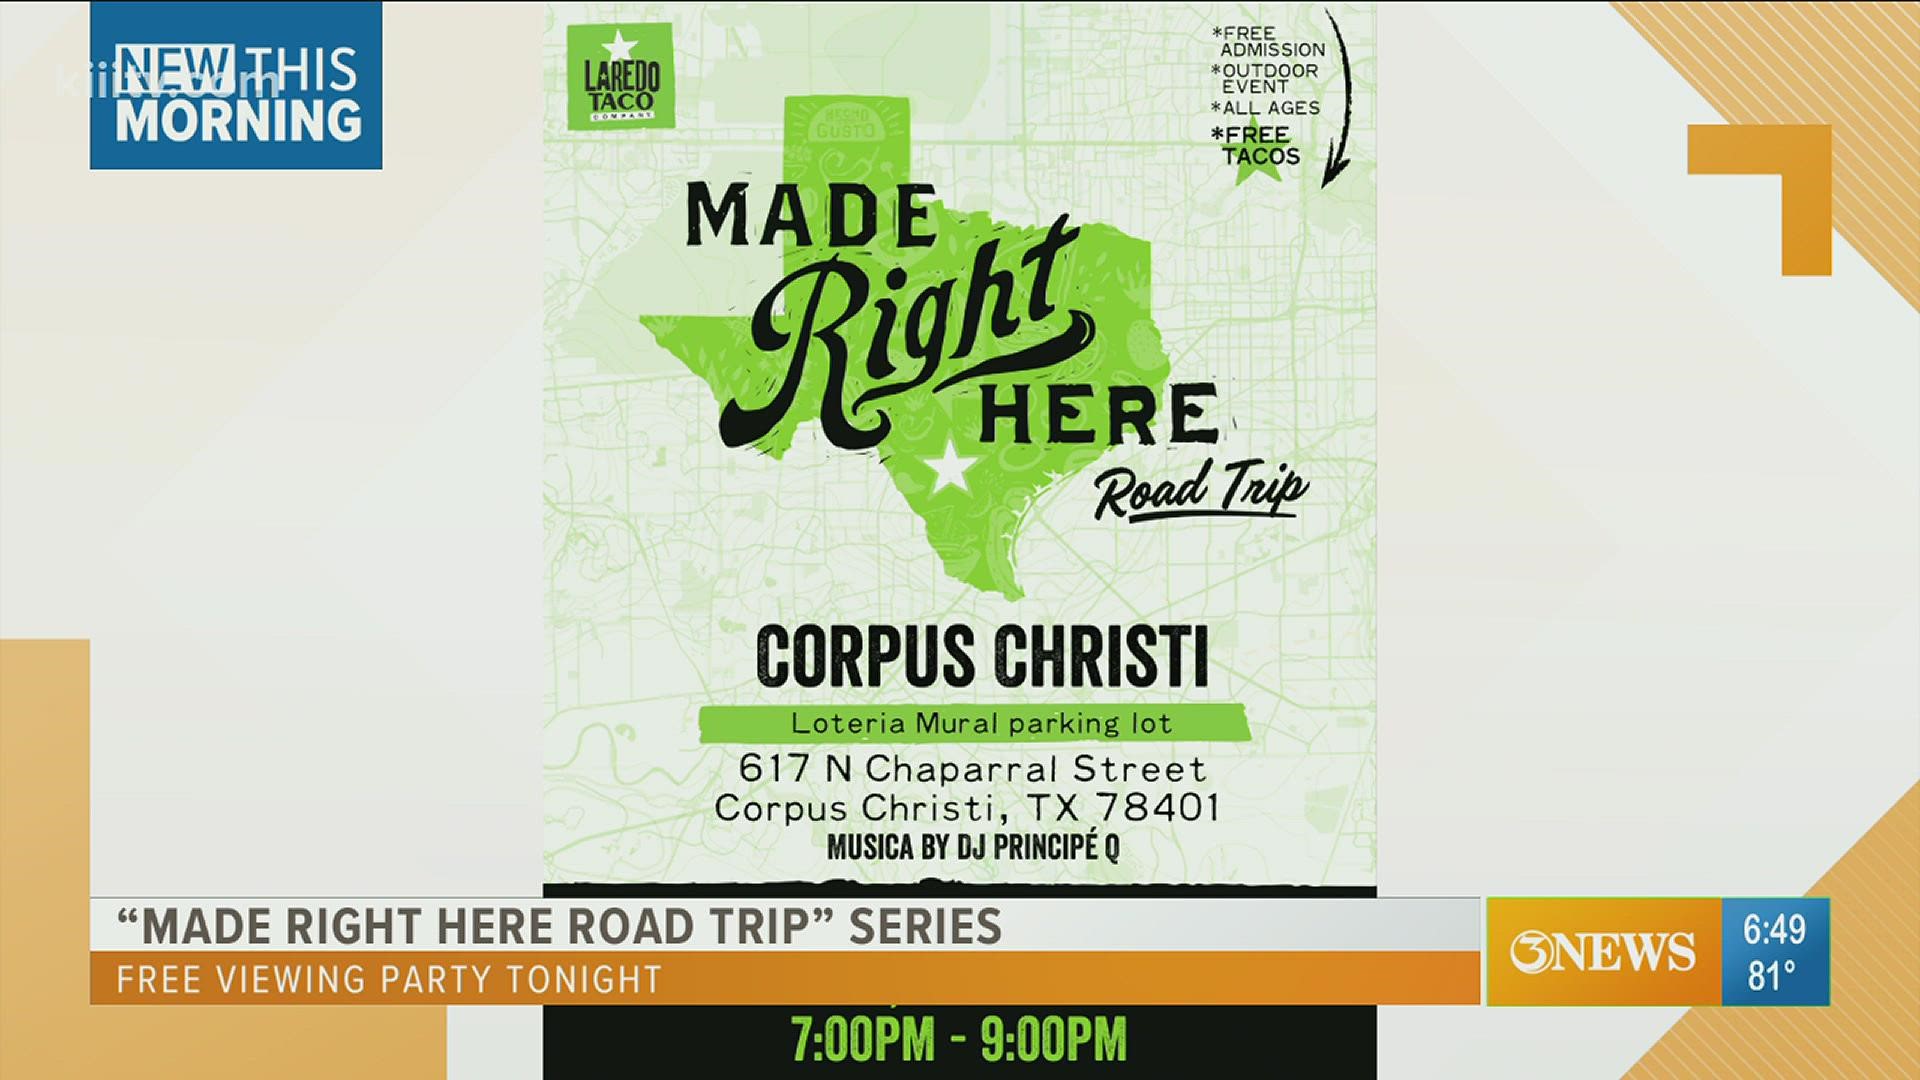 The episode of the series involves Corpus Christi, tacos and Hispanic Heritage Month.